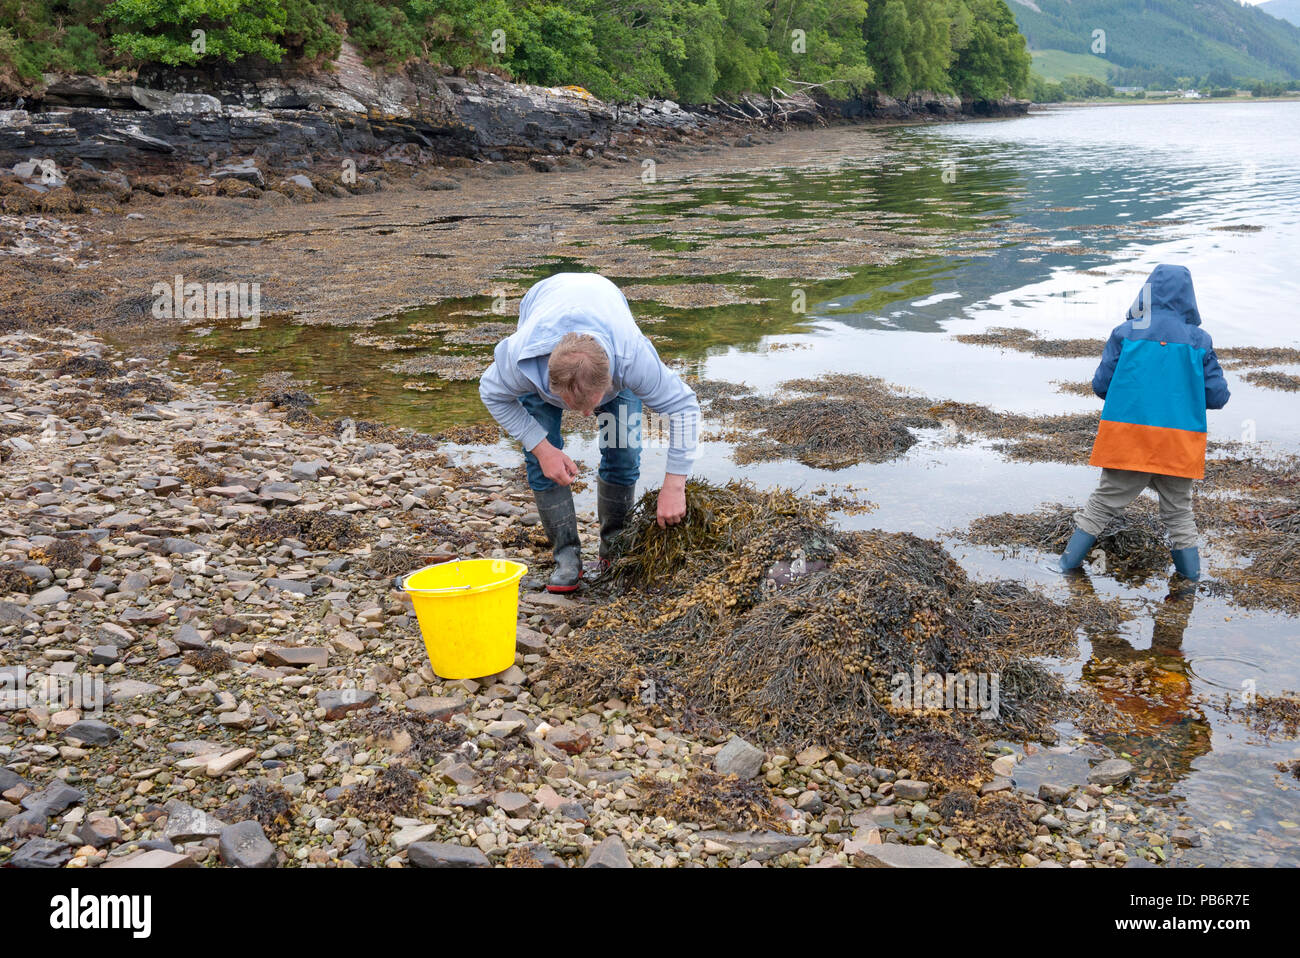 Young man with his son collecting Winkles (Littorina littorea) on a Scottish Loch, Scotland, UK. Stock Photo